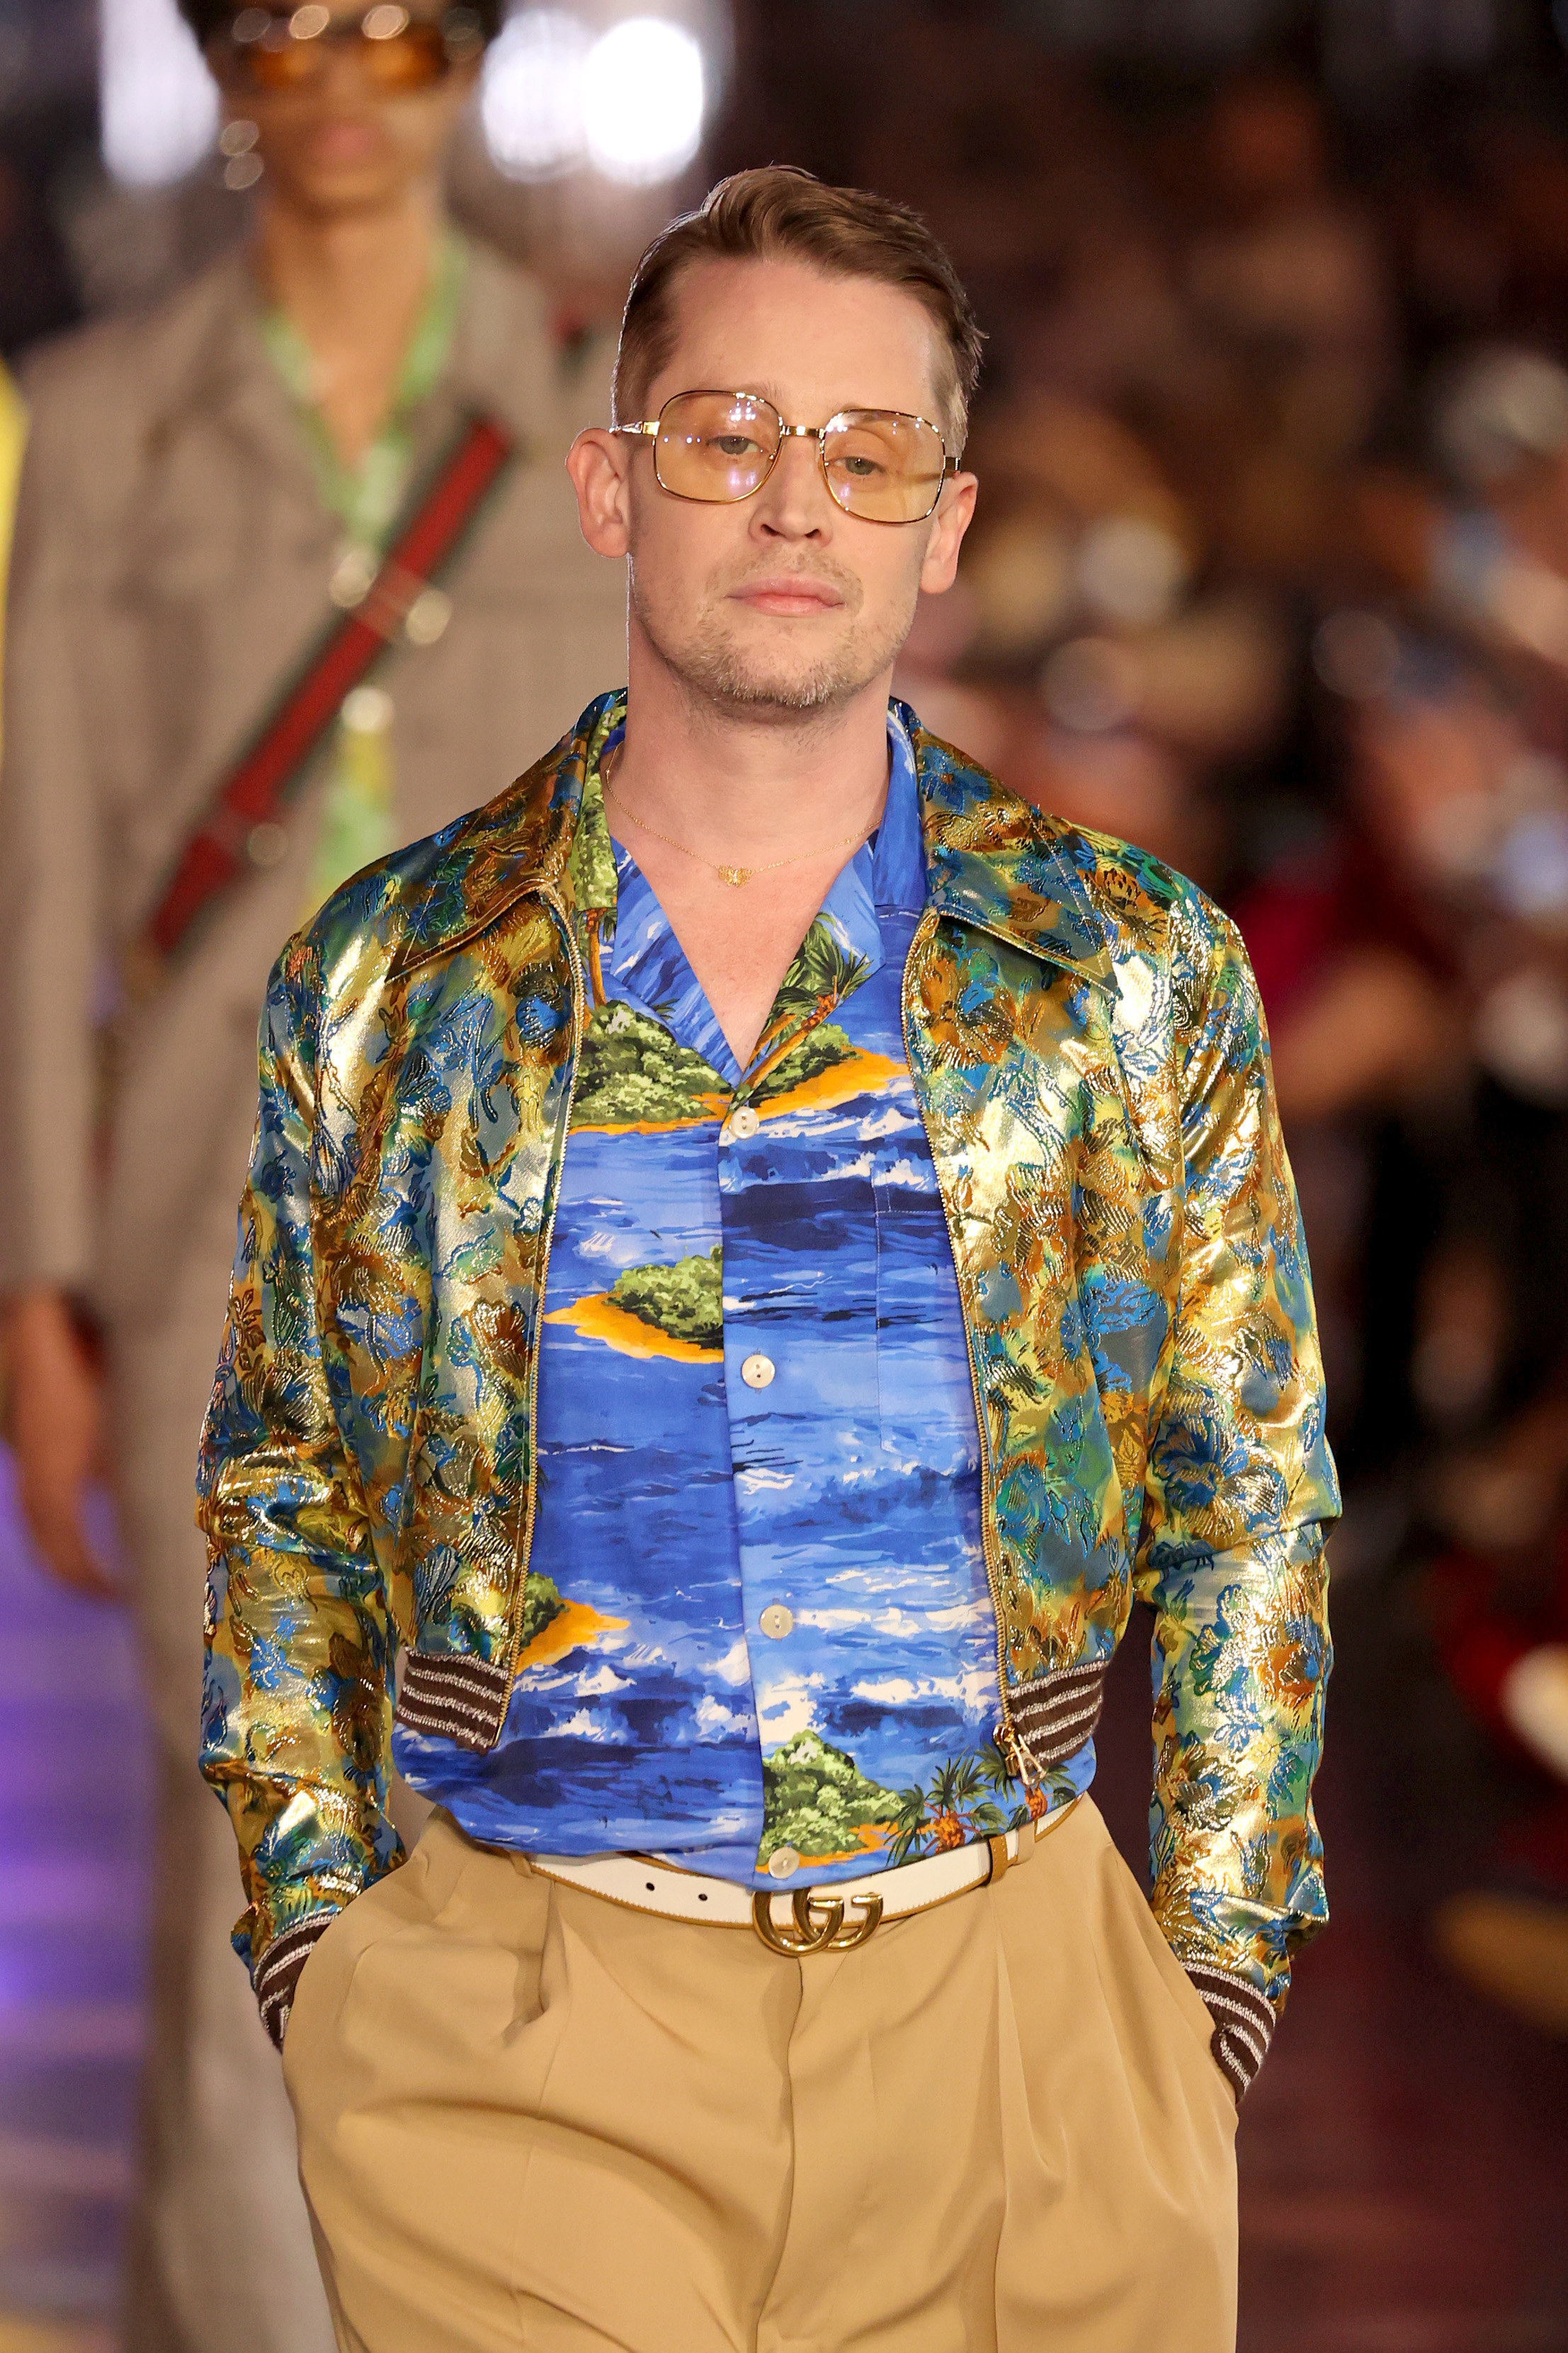 Macaulay on Prada runway, wearing a bomber jacket in the colours of a peacock&#x27;s tail over a blue shirt with the sea and several small islands on it, and camel colored trousers.